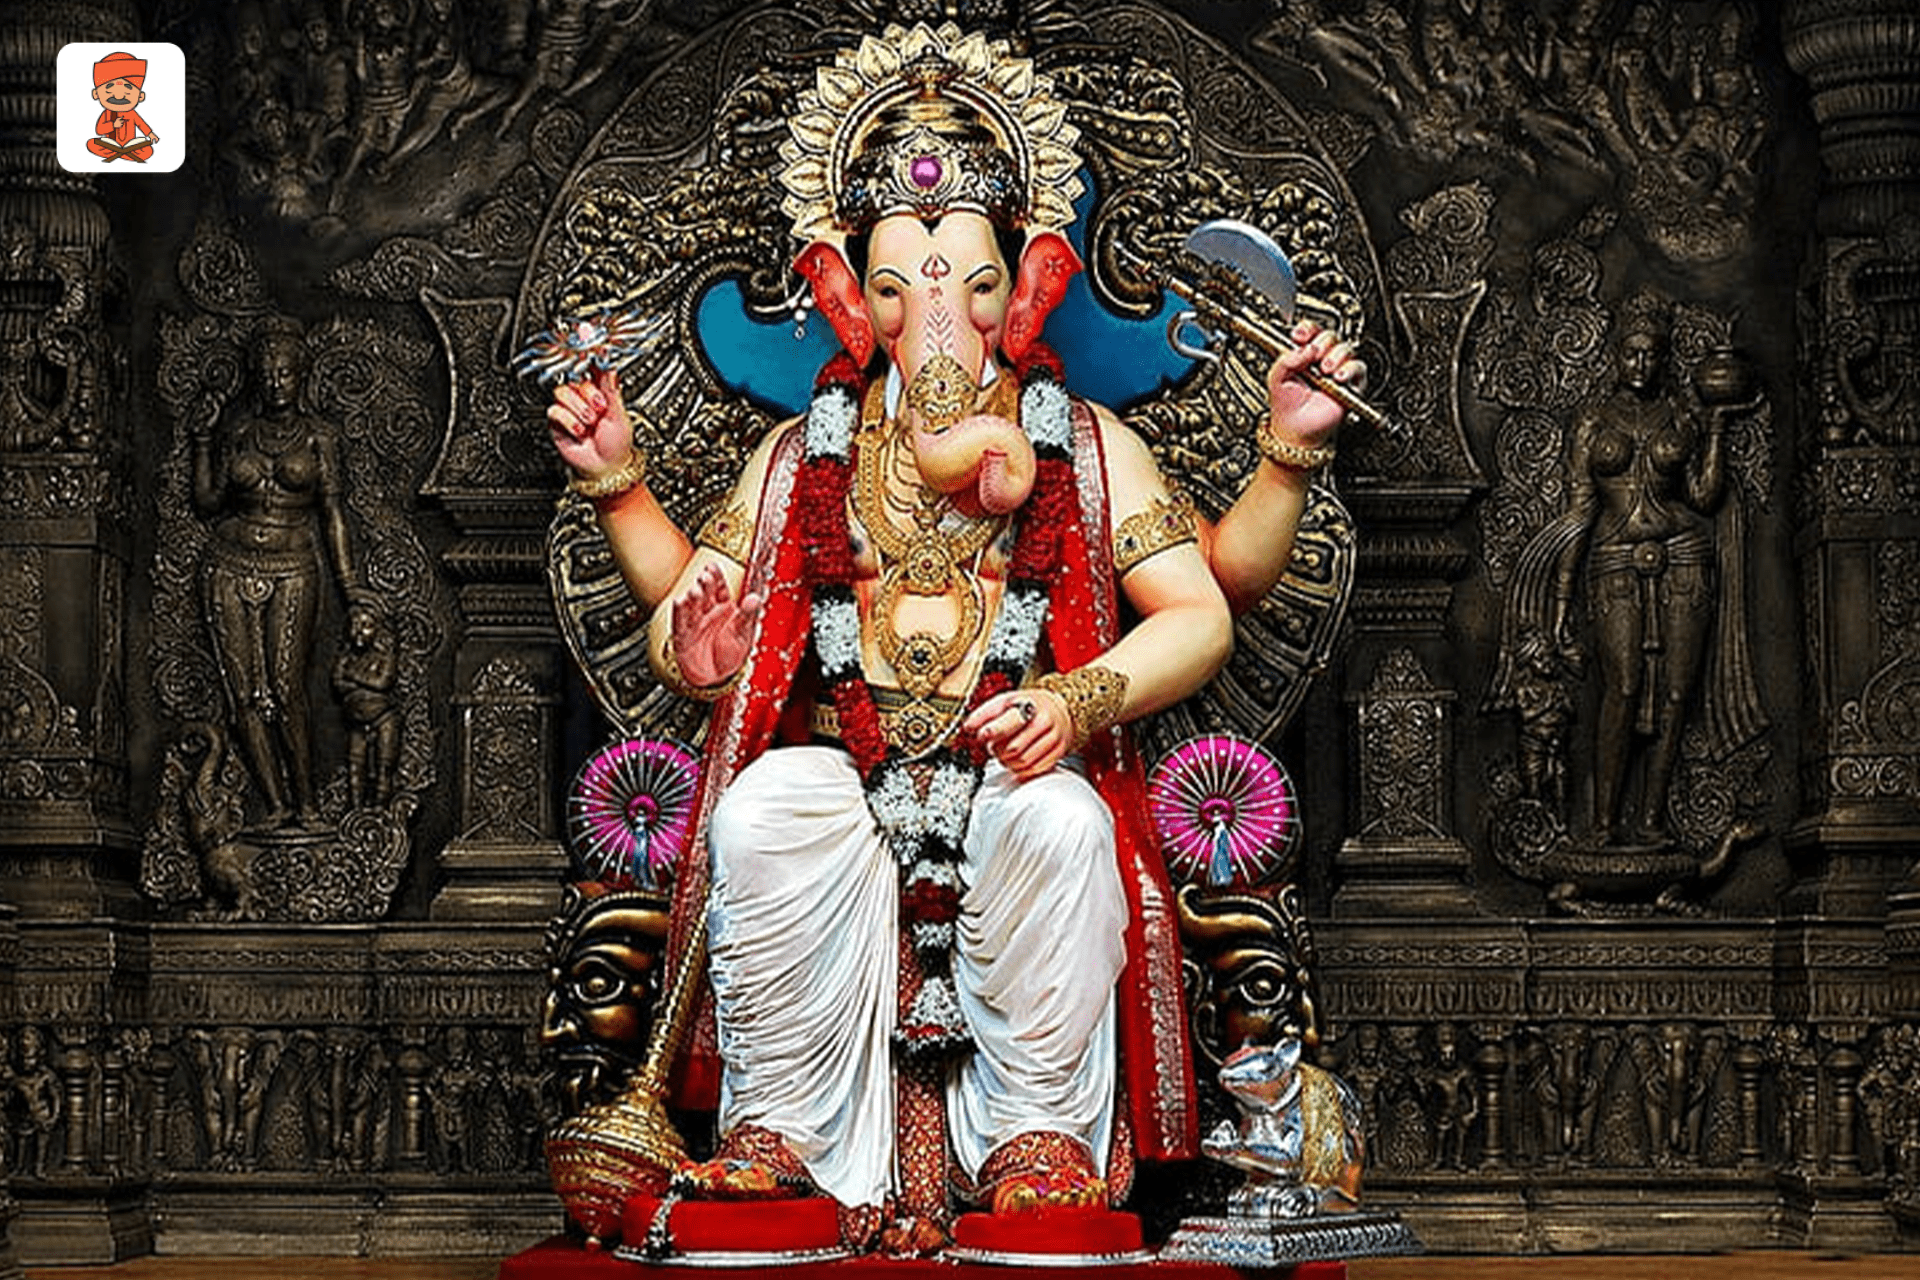 Vinayaka Chaturthi January 2022: What Is The Significance Of The First Chaturthi This Time?